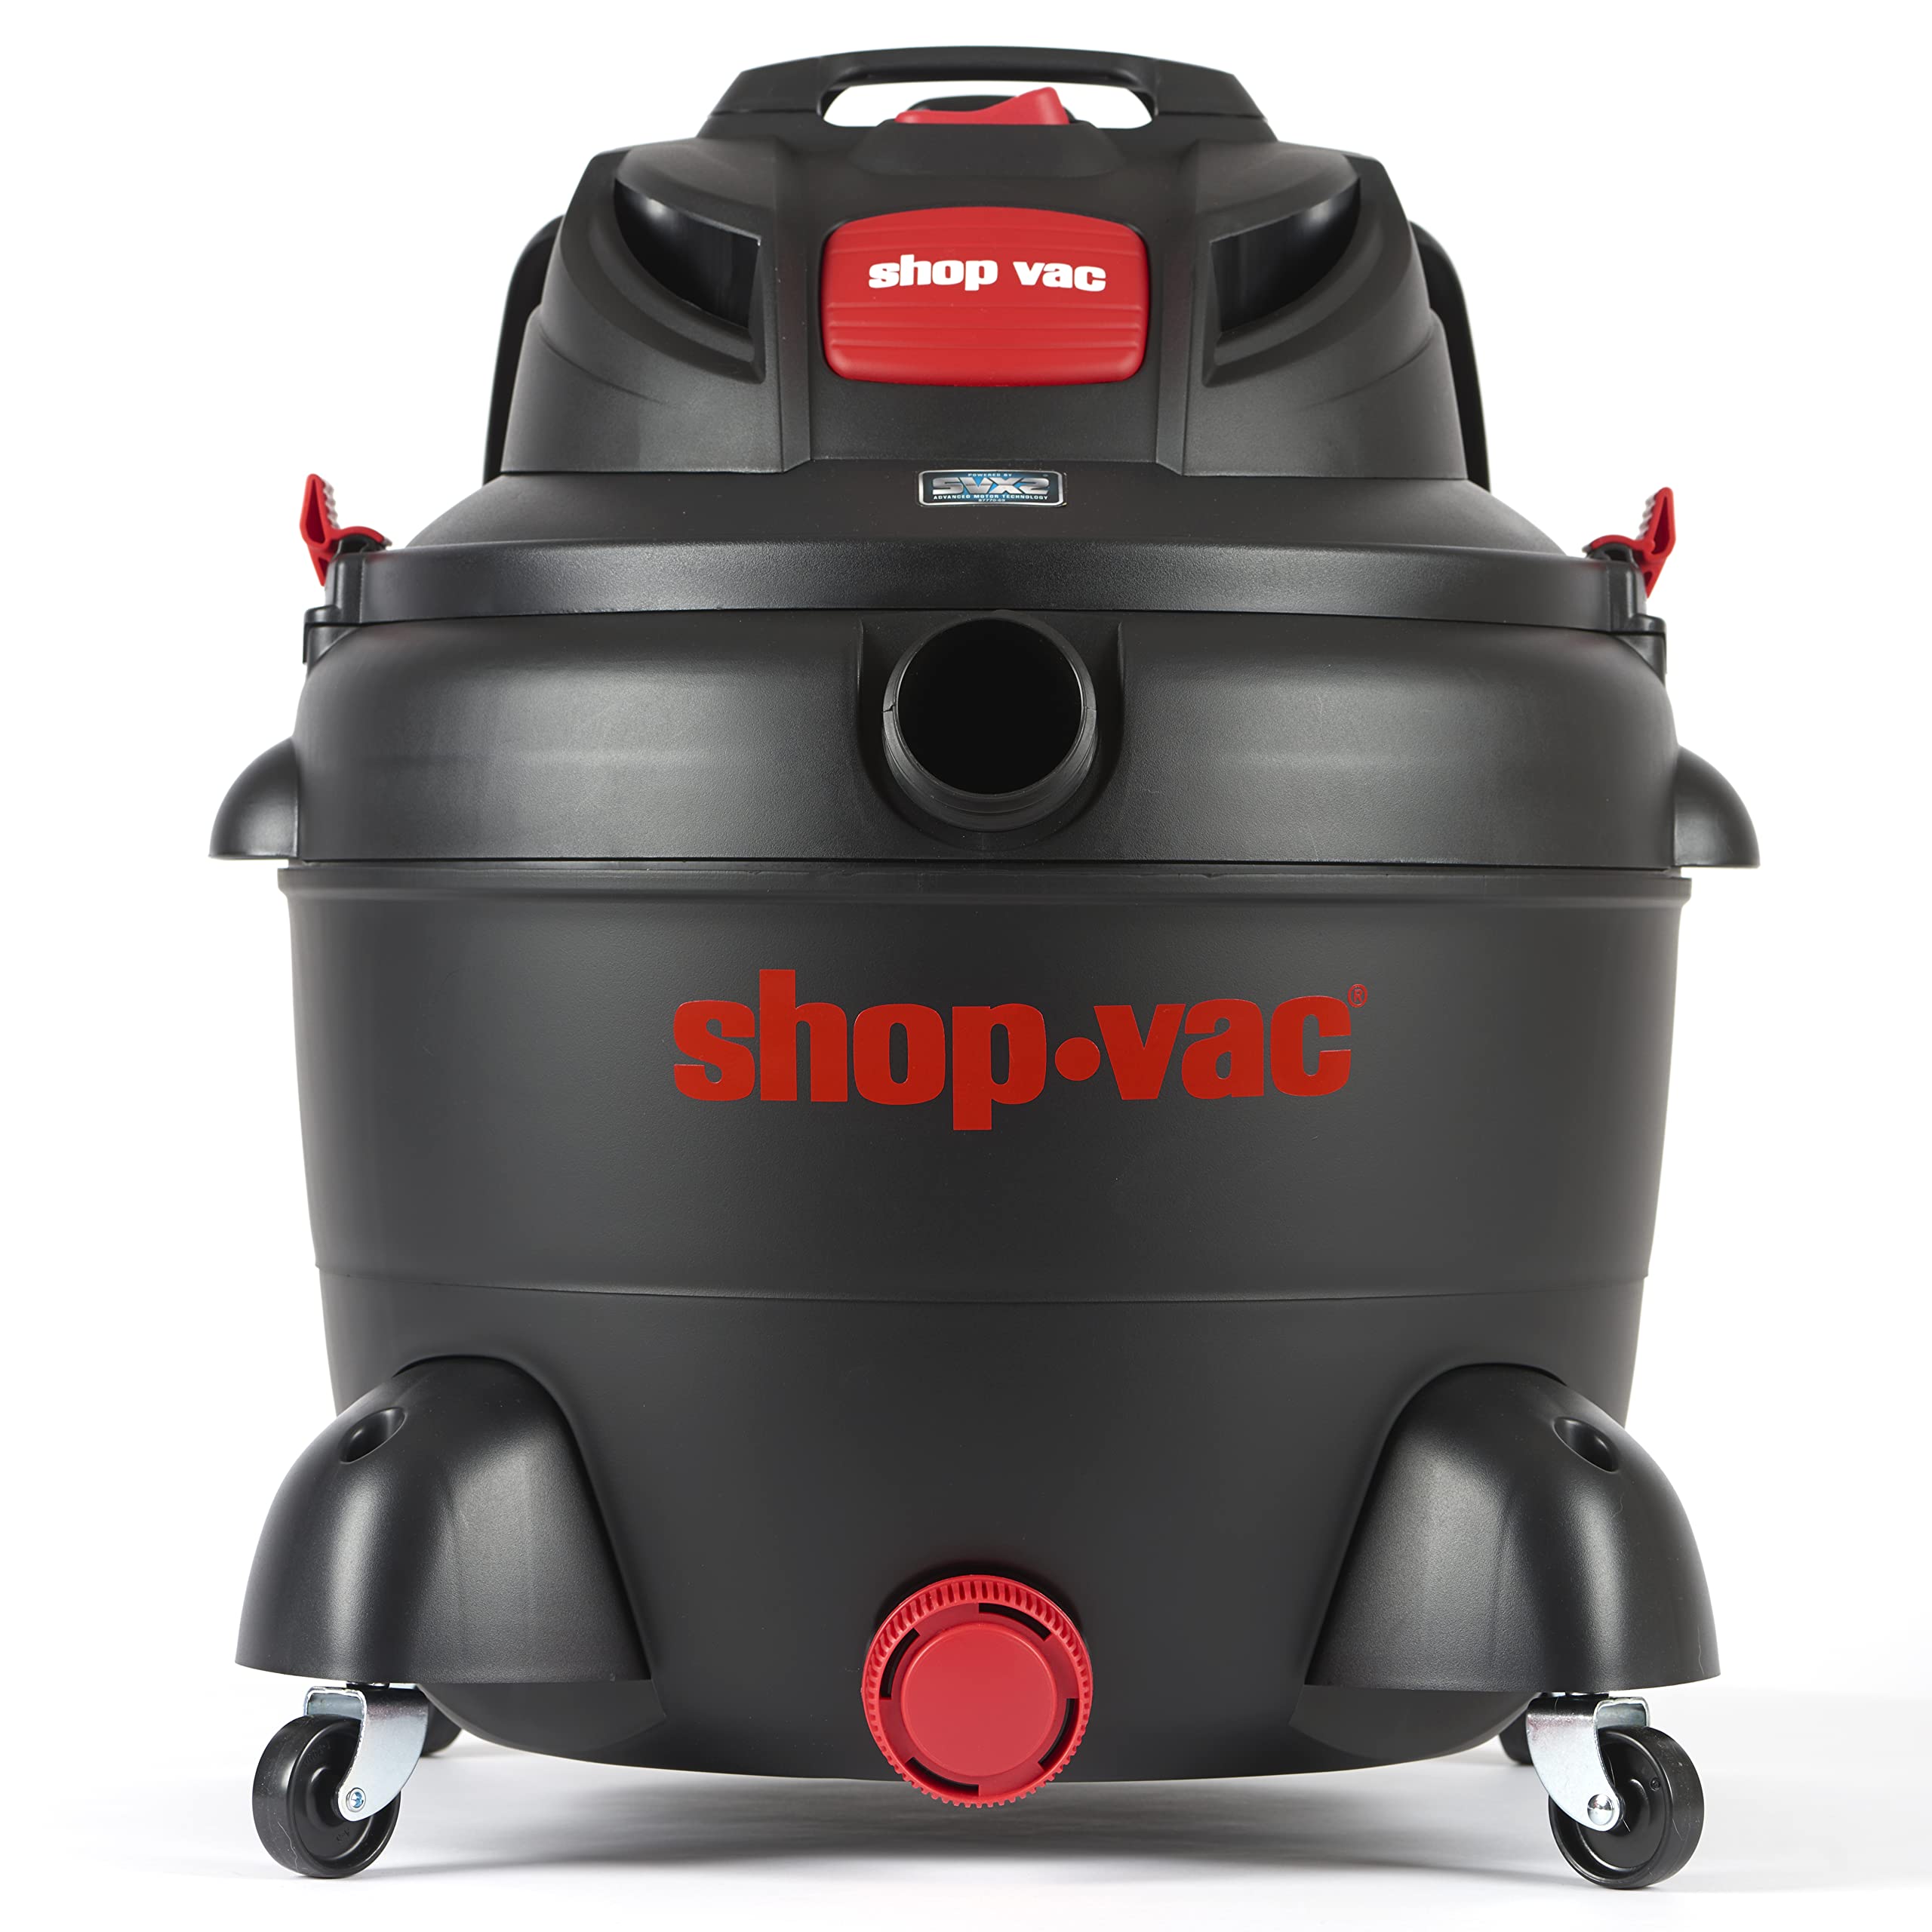 Shop-Vac 8252605 Wet Dry Utility Vacuum With Svx2 Motor Technology, 16 Gallon, 2-12 Inch X 8 Foot Hose, 150 Cfm, (1-Pack)